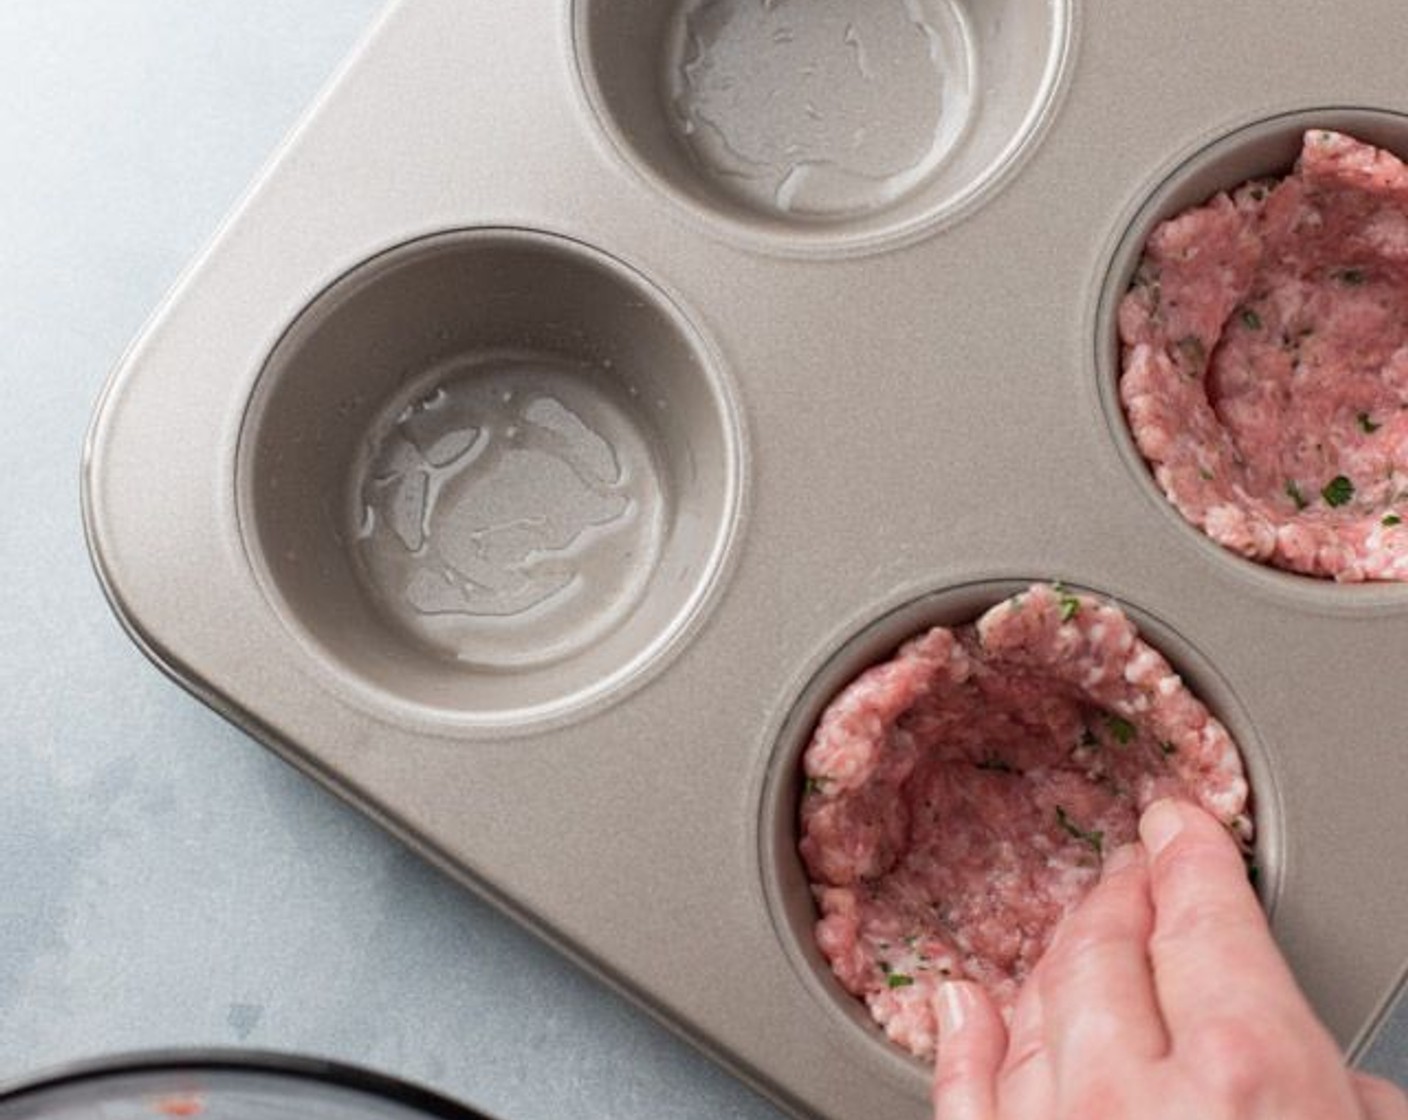 step 4 Divide the sausage mix into 6 balls. Flatten each into a large patty and place individually into the muffin tins, forming a shell leaving room for eggs.